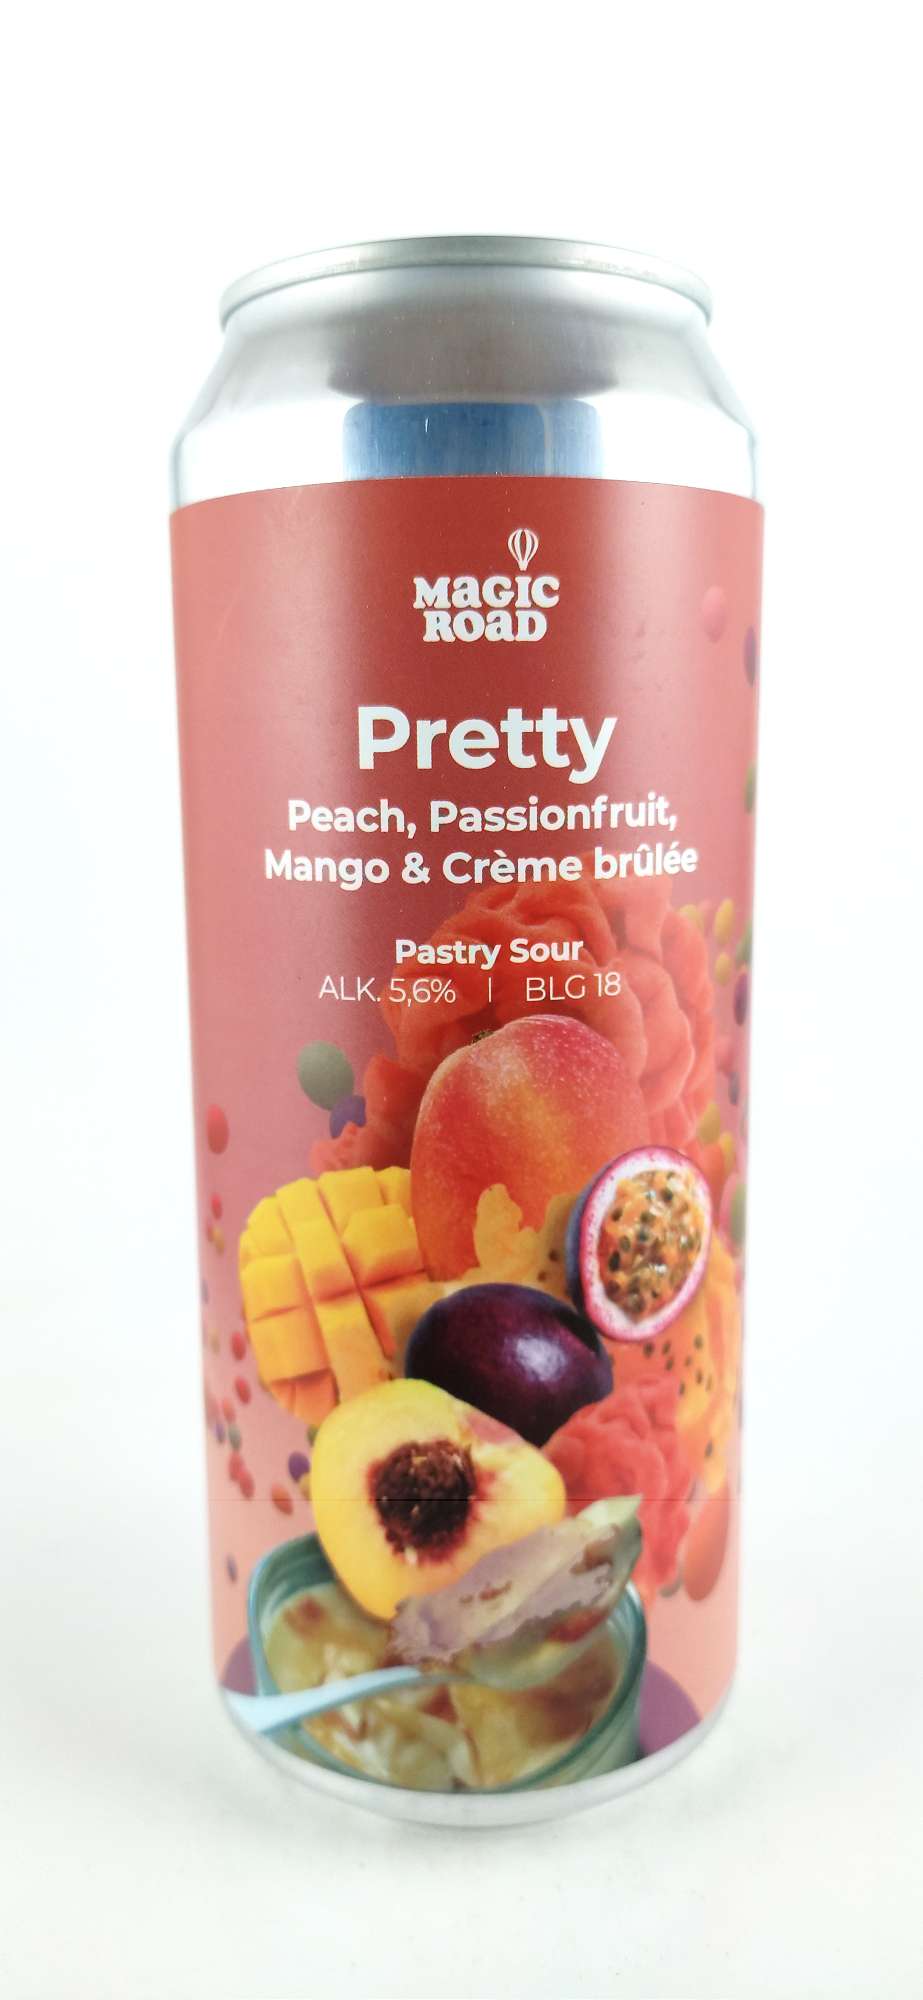 Magic Road Pretty - Peach, Passionfruit, Mango, CremeBrulee Pastry Sour 18°